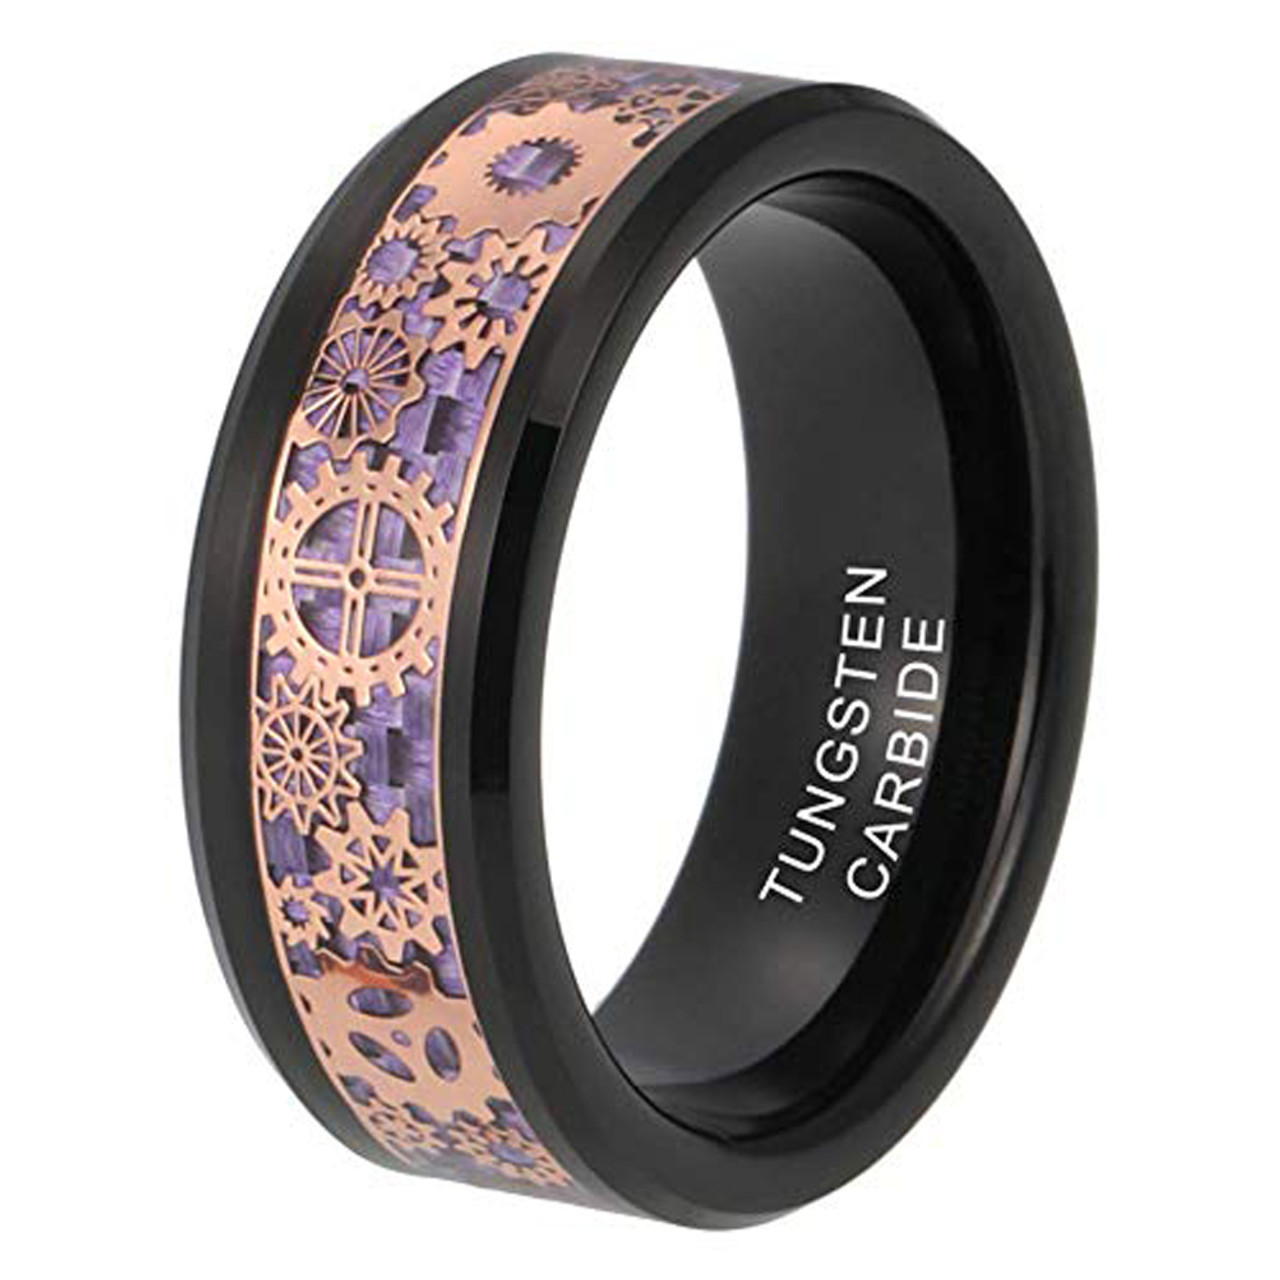 (8mm) Unisex or Men's Tungsten Carbide Wedding ring band. Wedding ring band Violet Purple Carbon Fiber Inlay Black Band with Rose Gold Mechanical Gears. Tungsten Carbide Ring